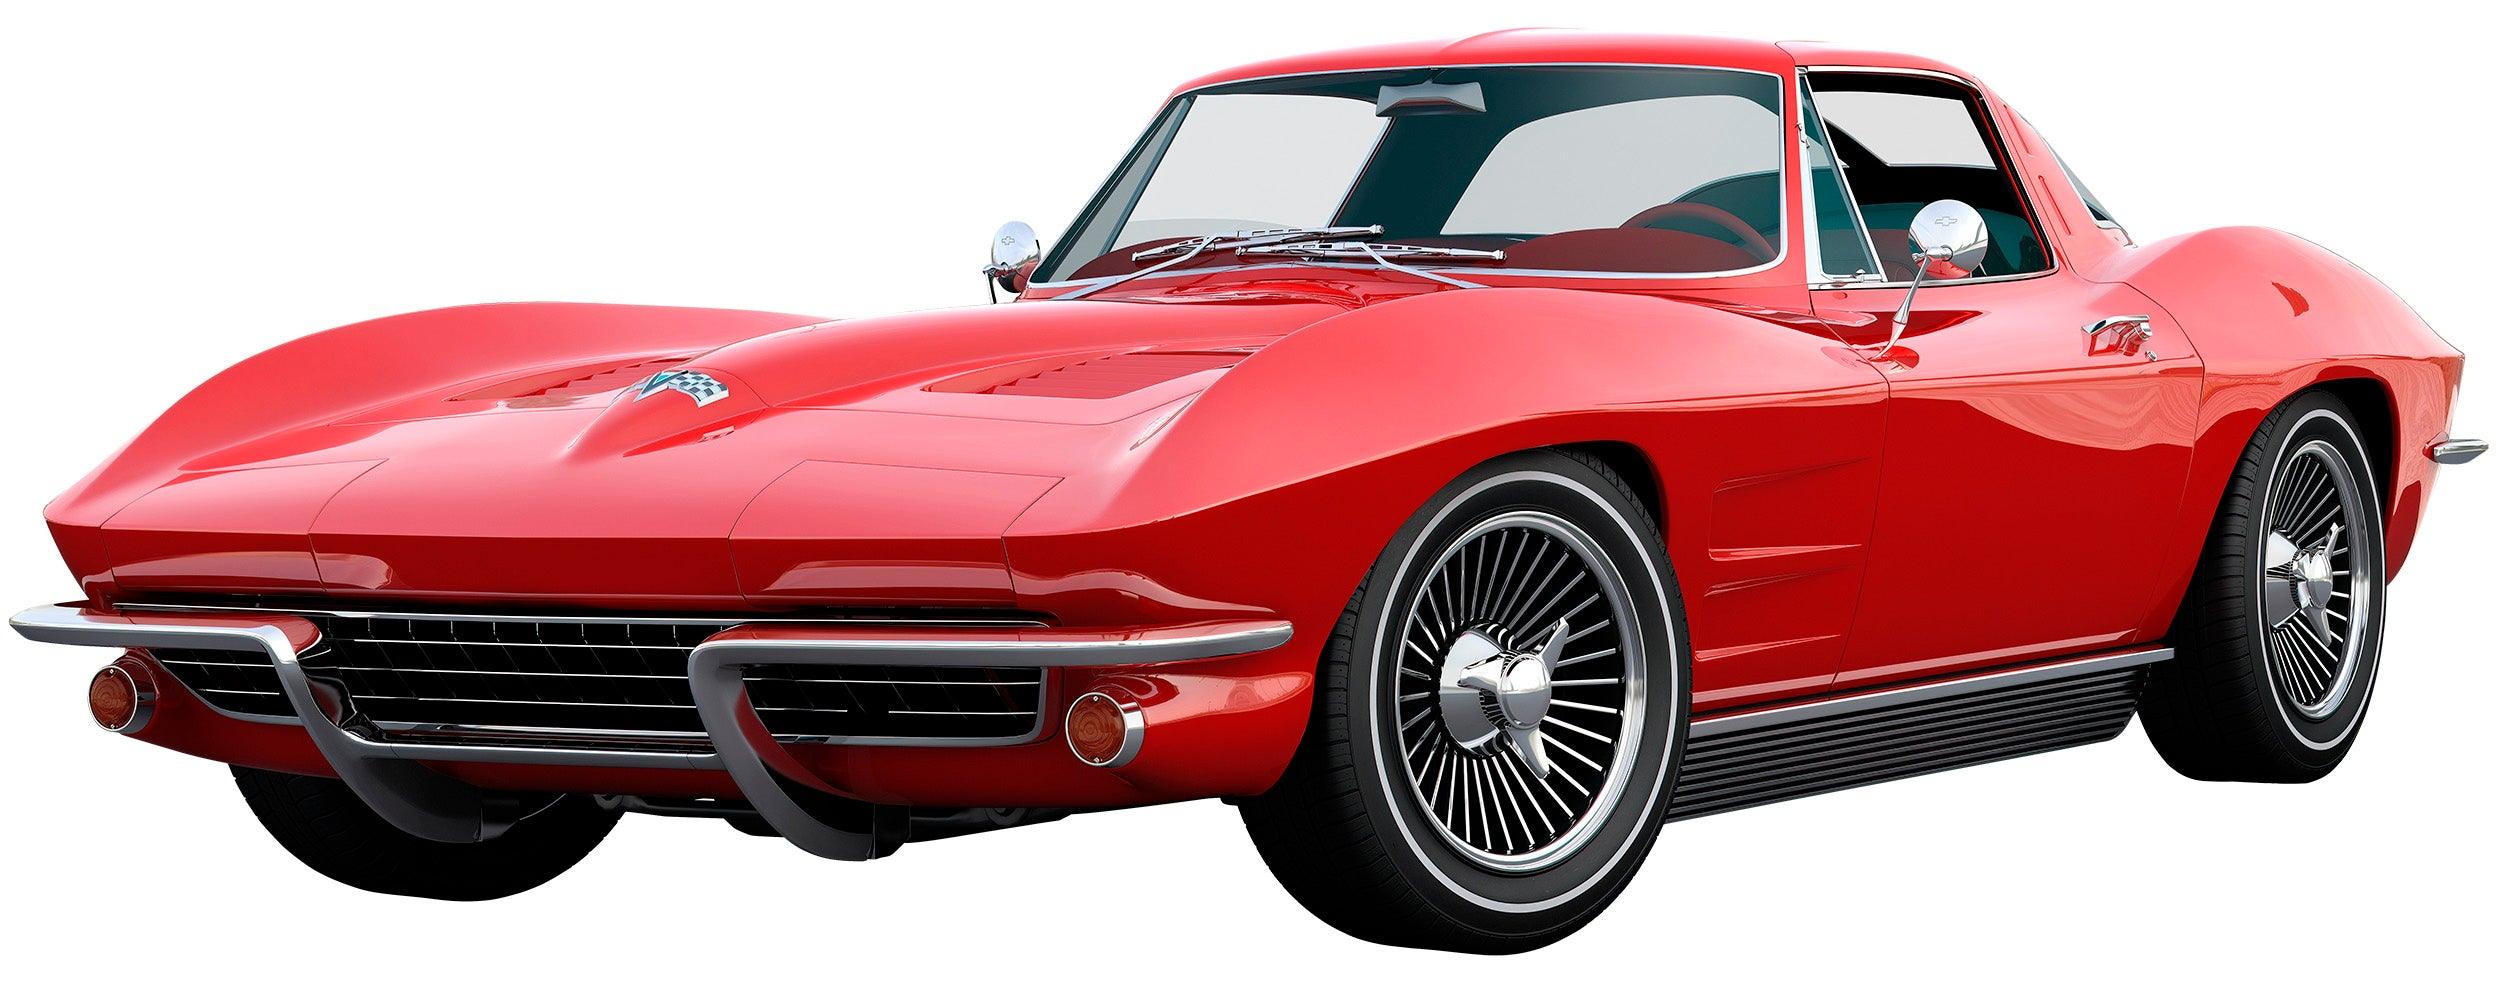 1965 Corvette C2 Stingray Red, Wall Decal Sticker, Easy to Peel-N-Stick 037